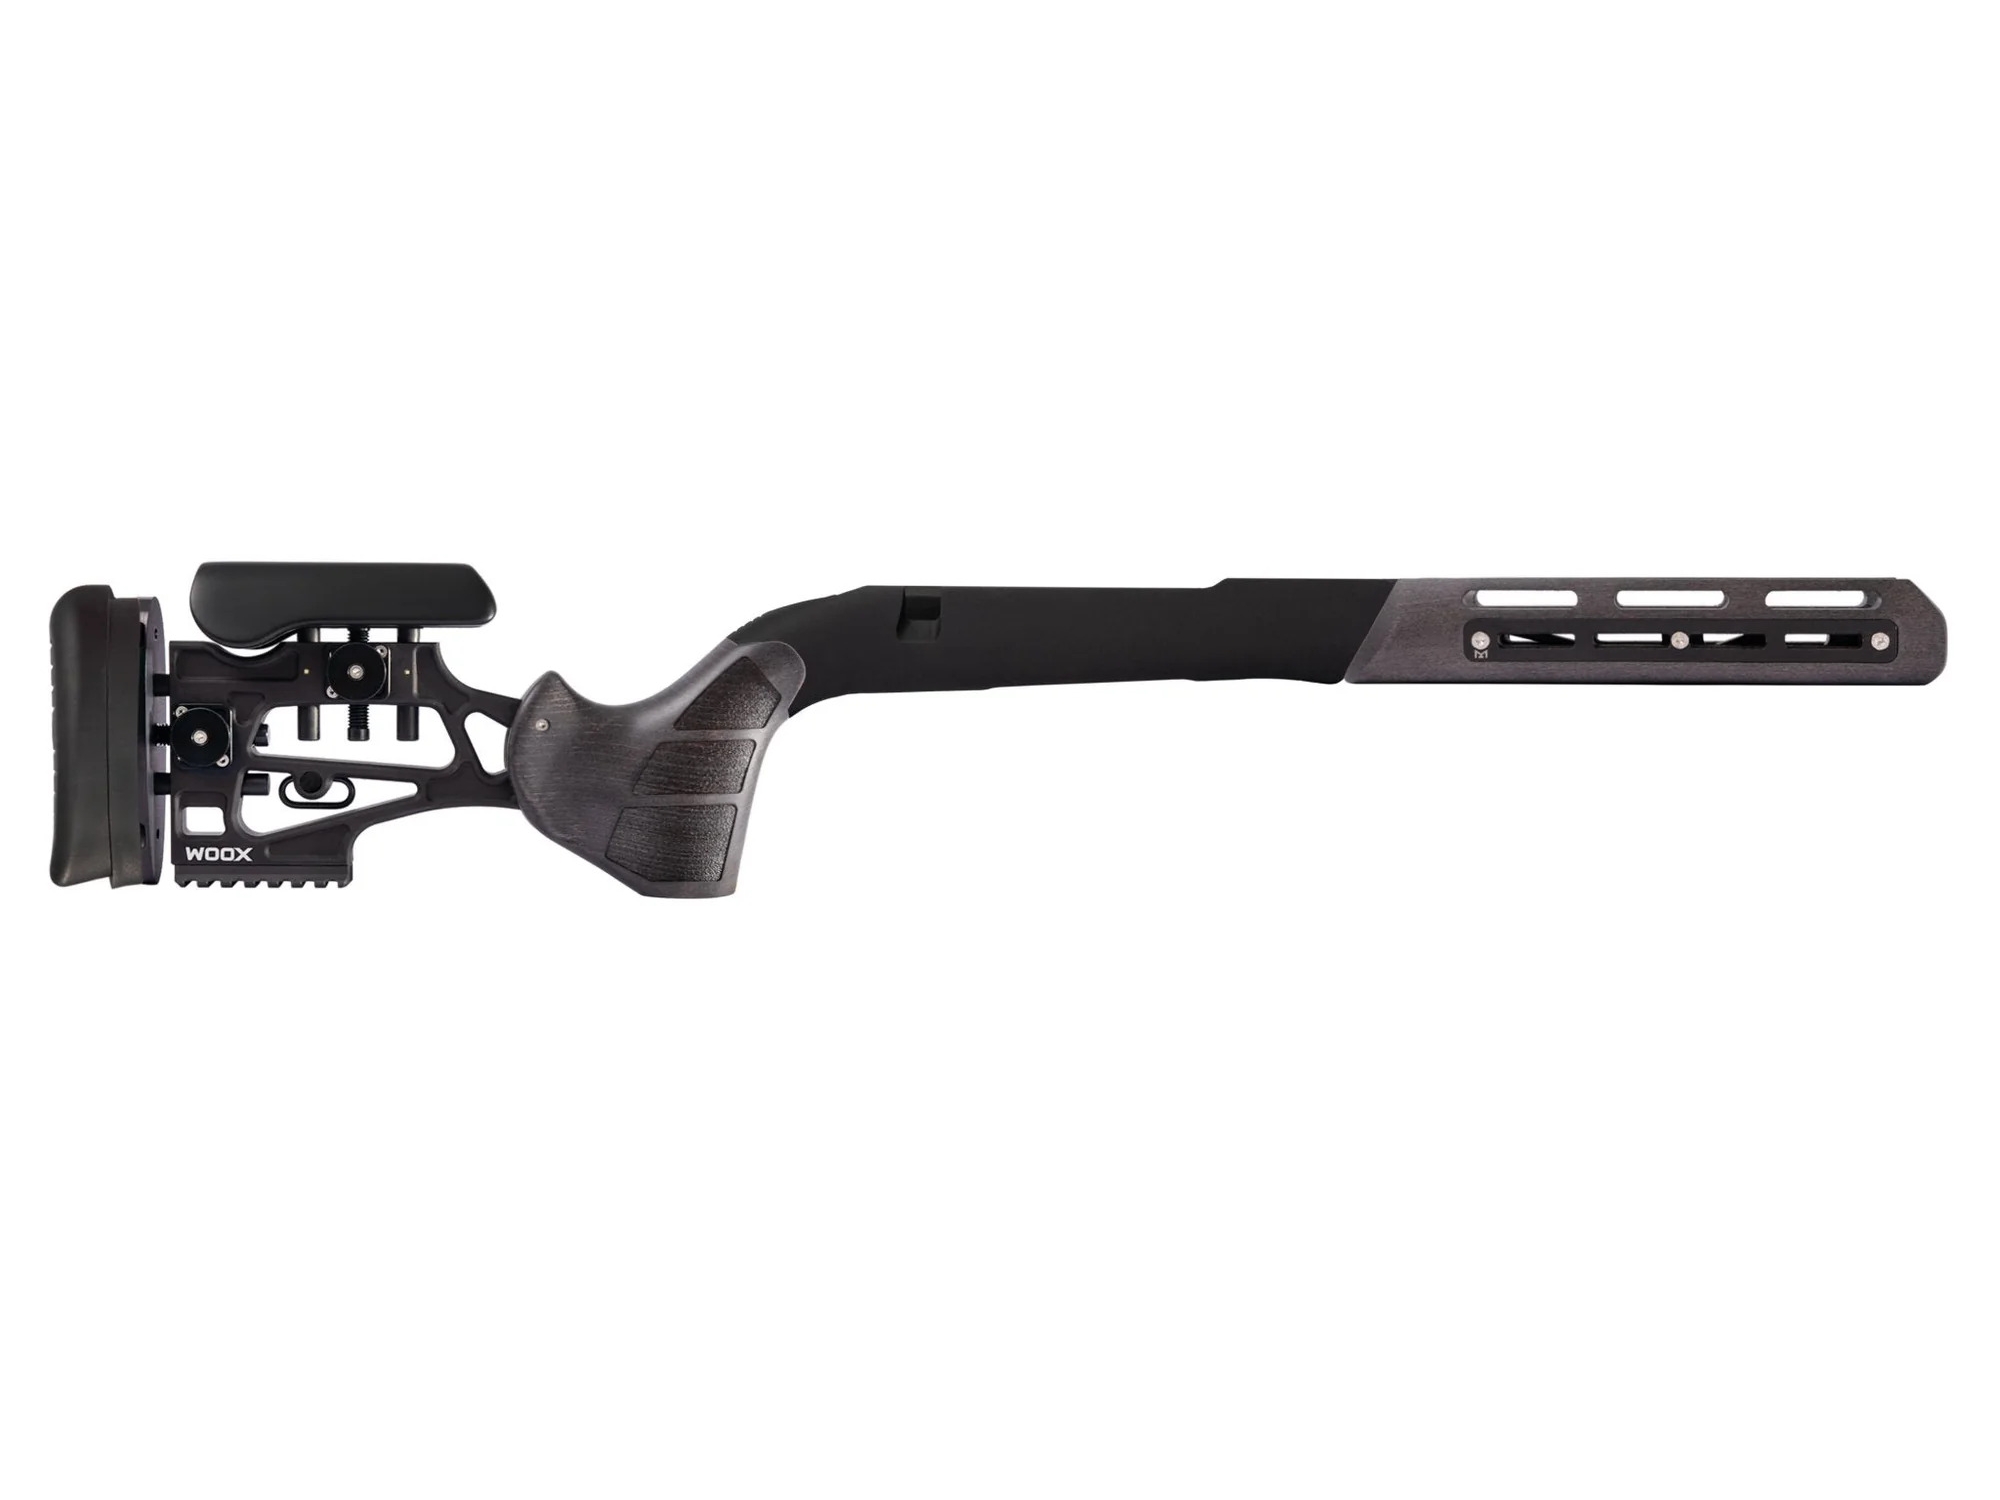 WOOX Furiosa Rifle Chassis for Sauer 100, Midnight Grey